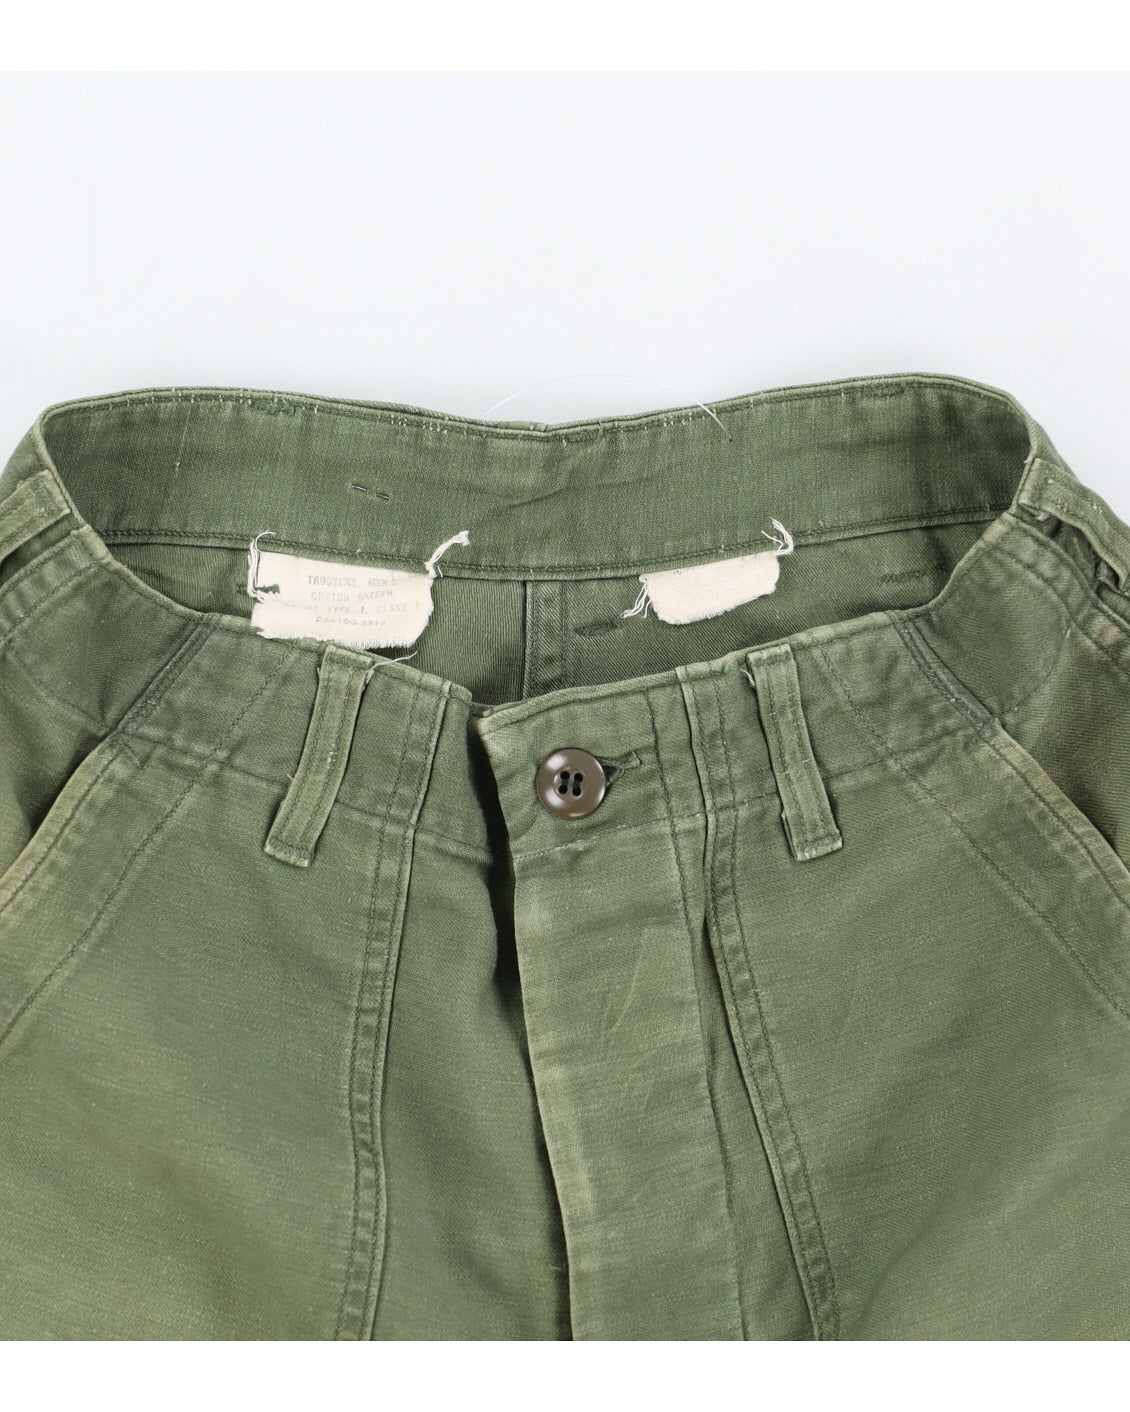 60s US Army OG-107 Sateen Trousers - 28x32